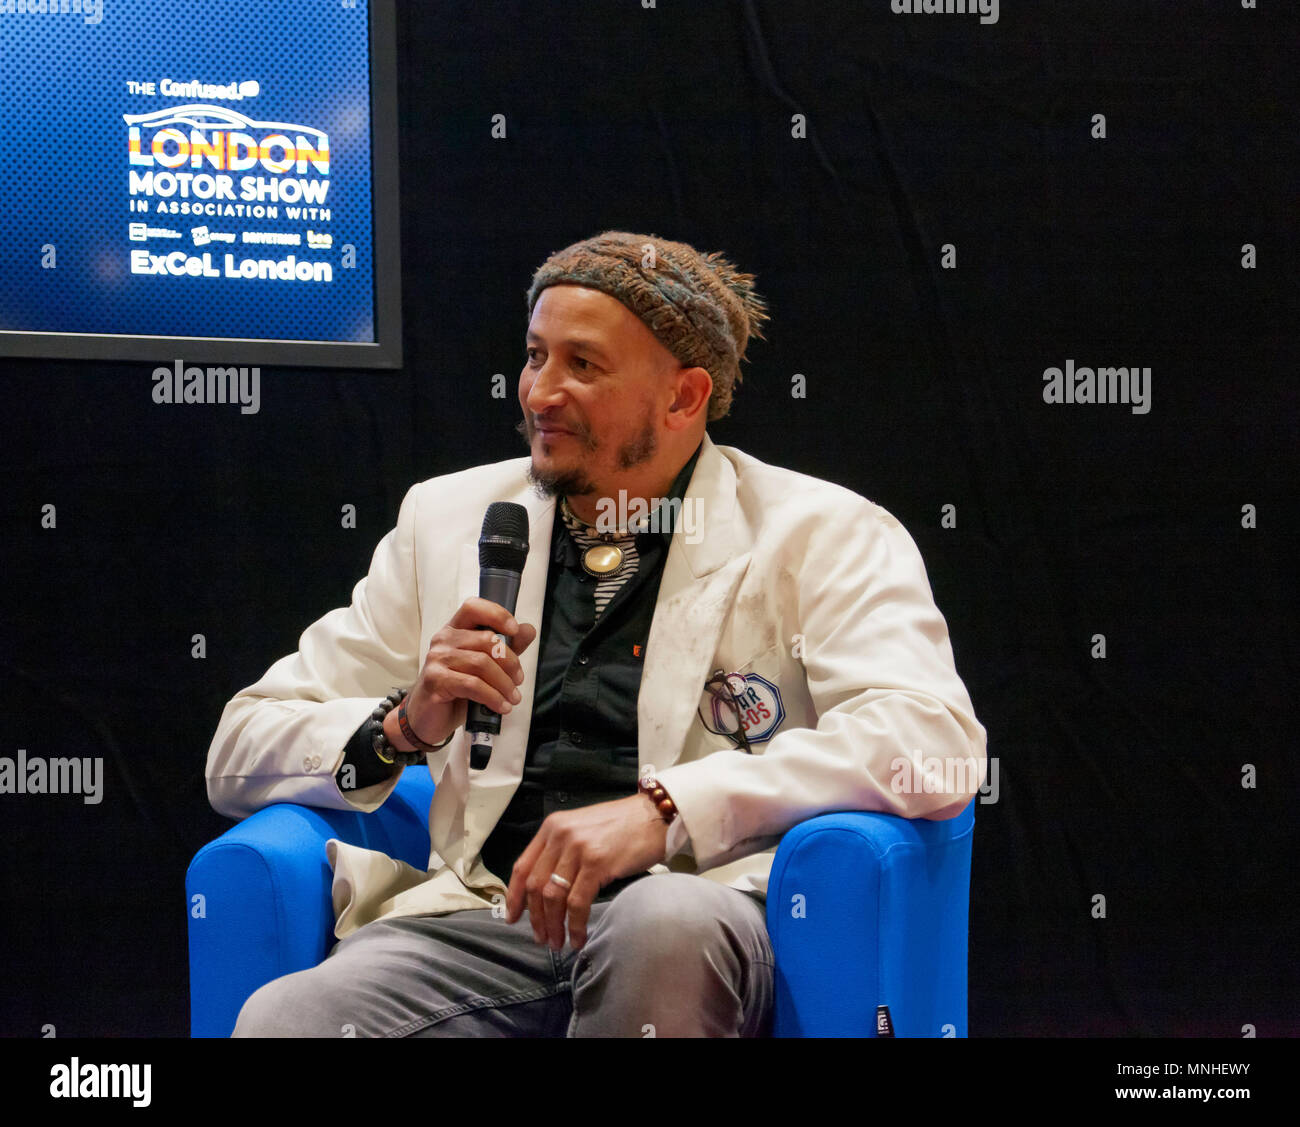 Fuzz Townshend, from the TV show, Car S.O.S., being interviewed at the Lecture Theatre, during the press day of  the London Motor Show 2018. Stock Photo